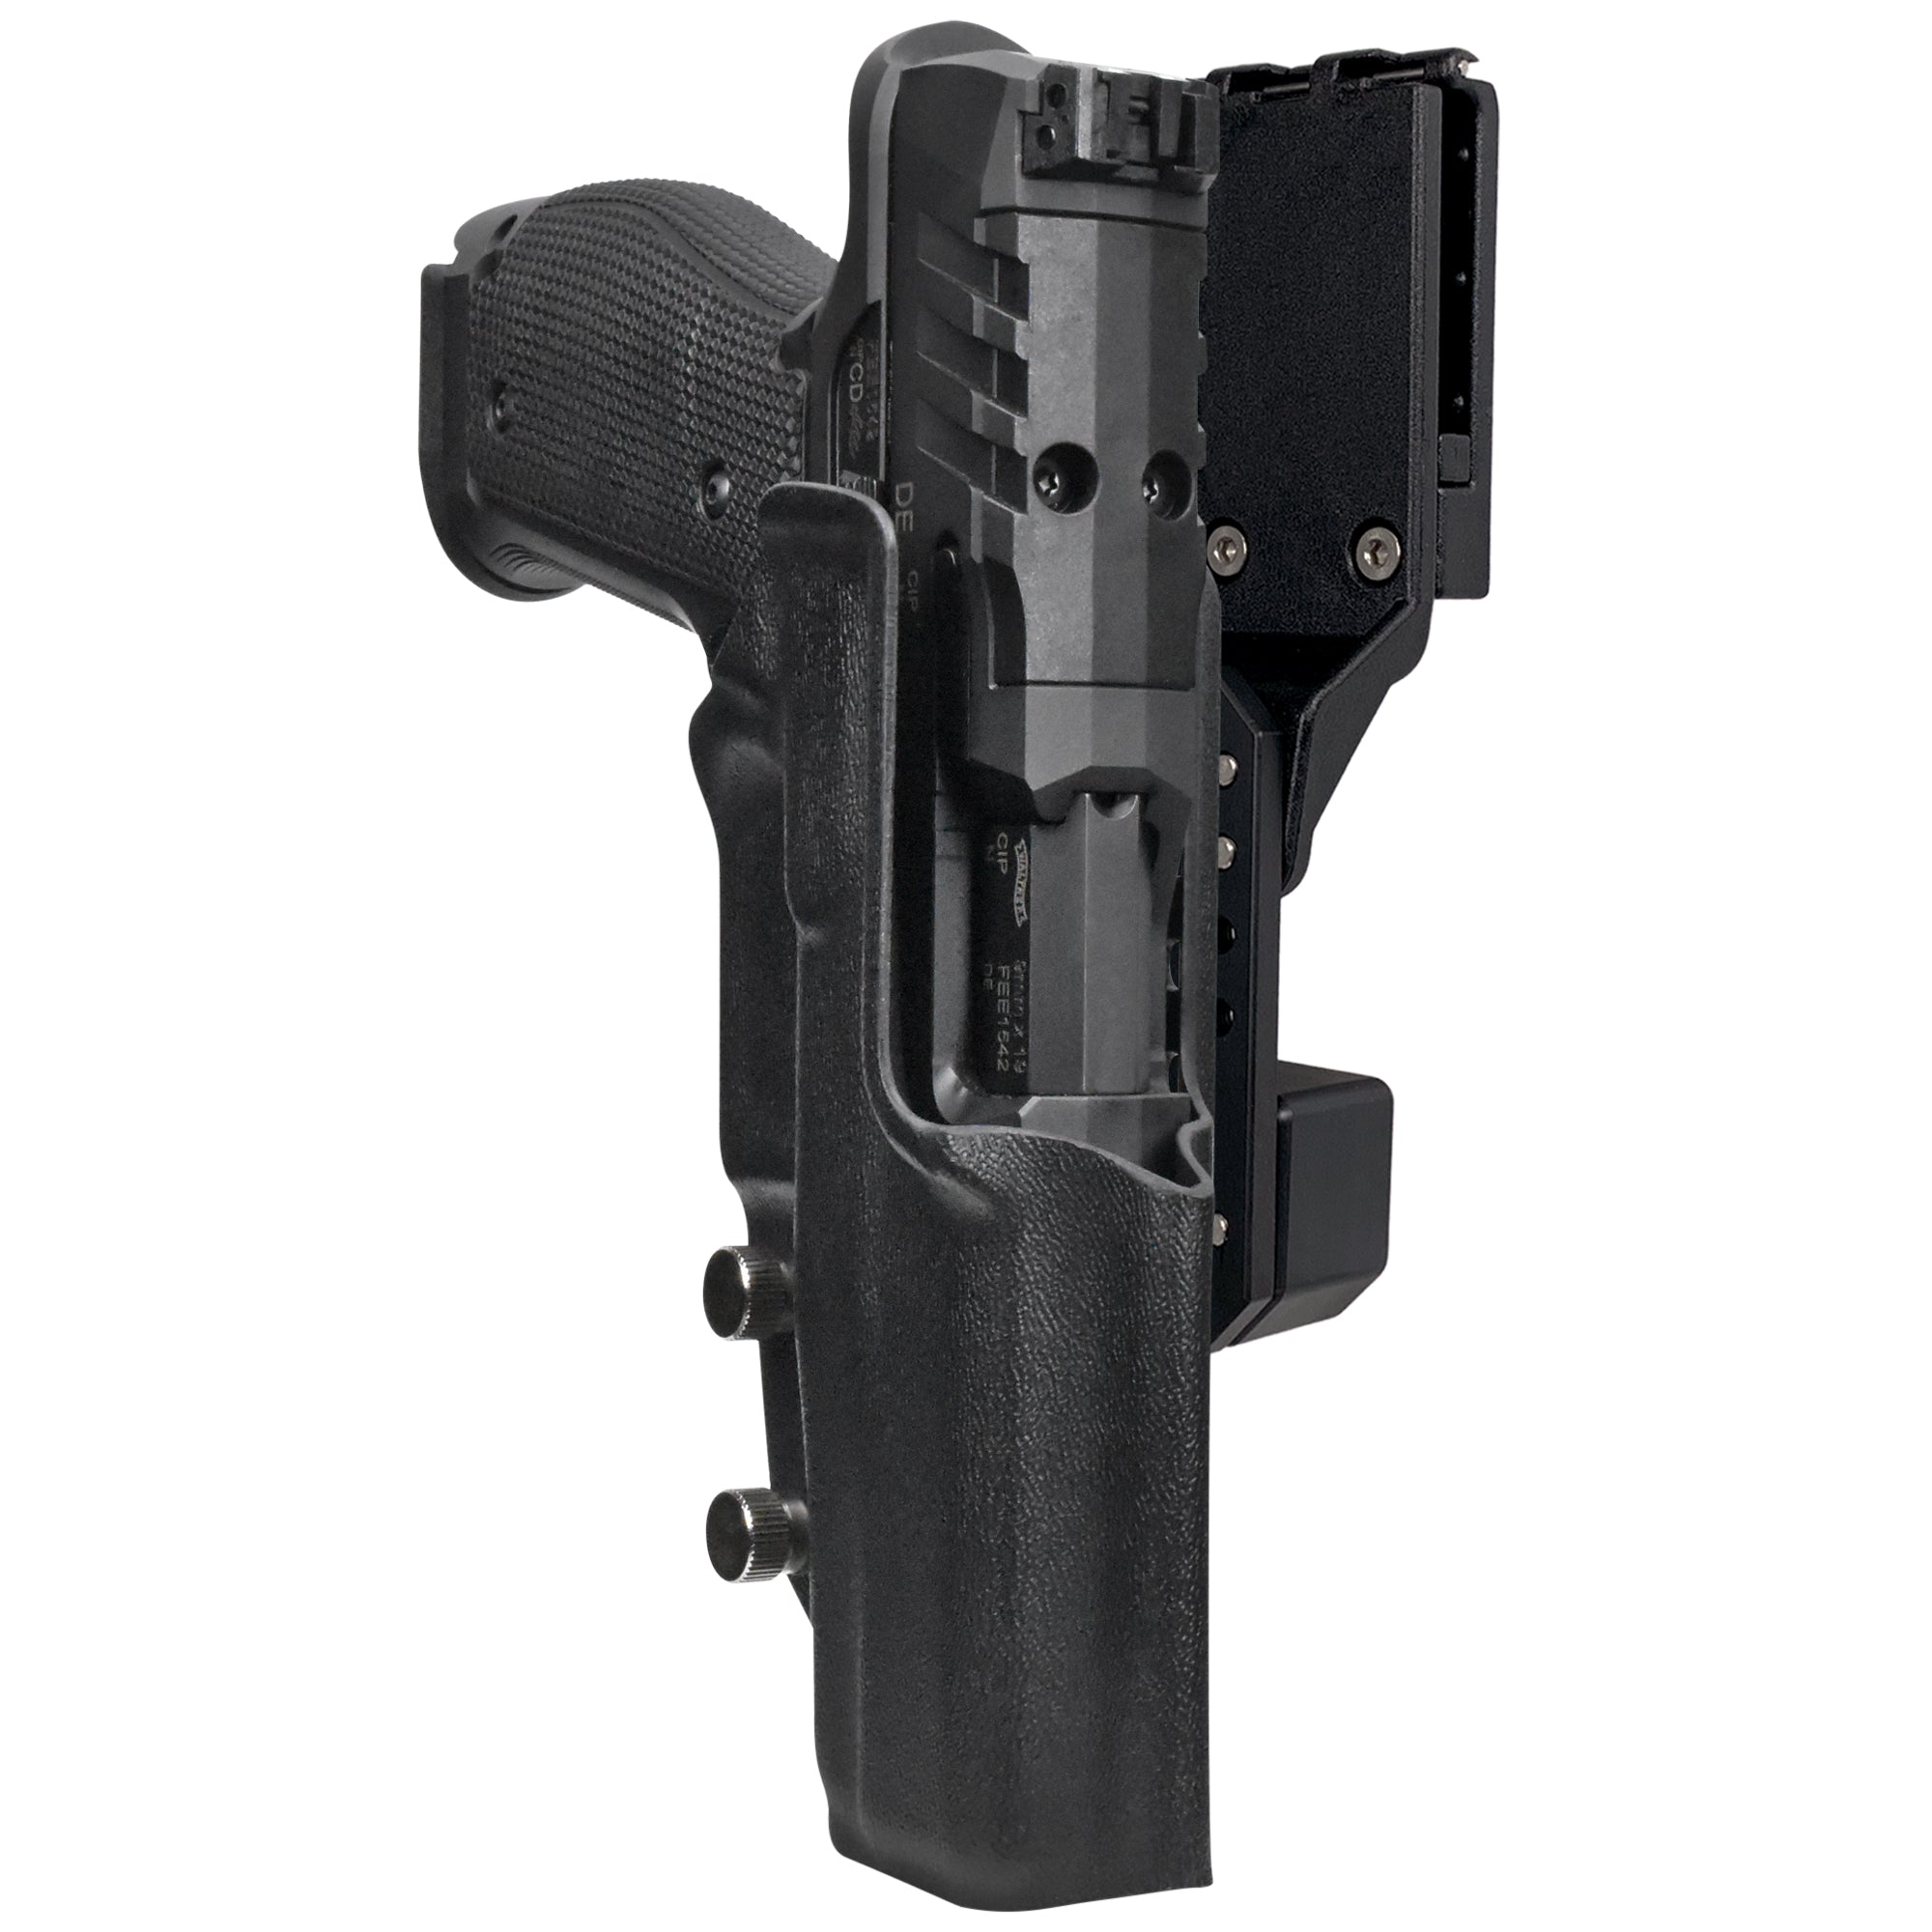 Pro Competition Holster in Black